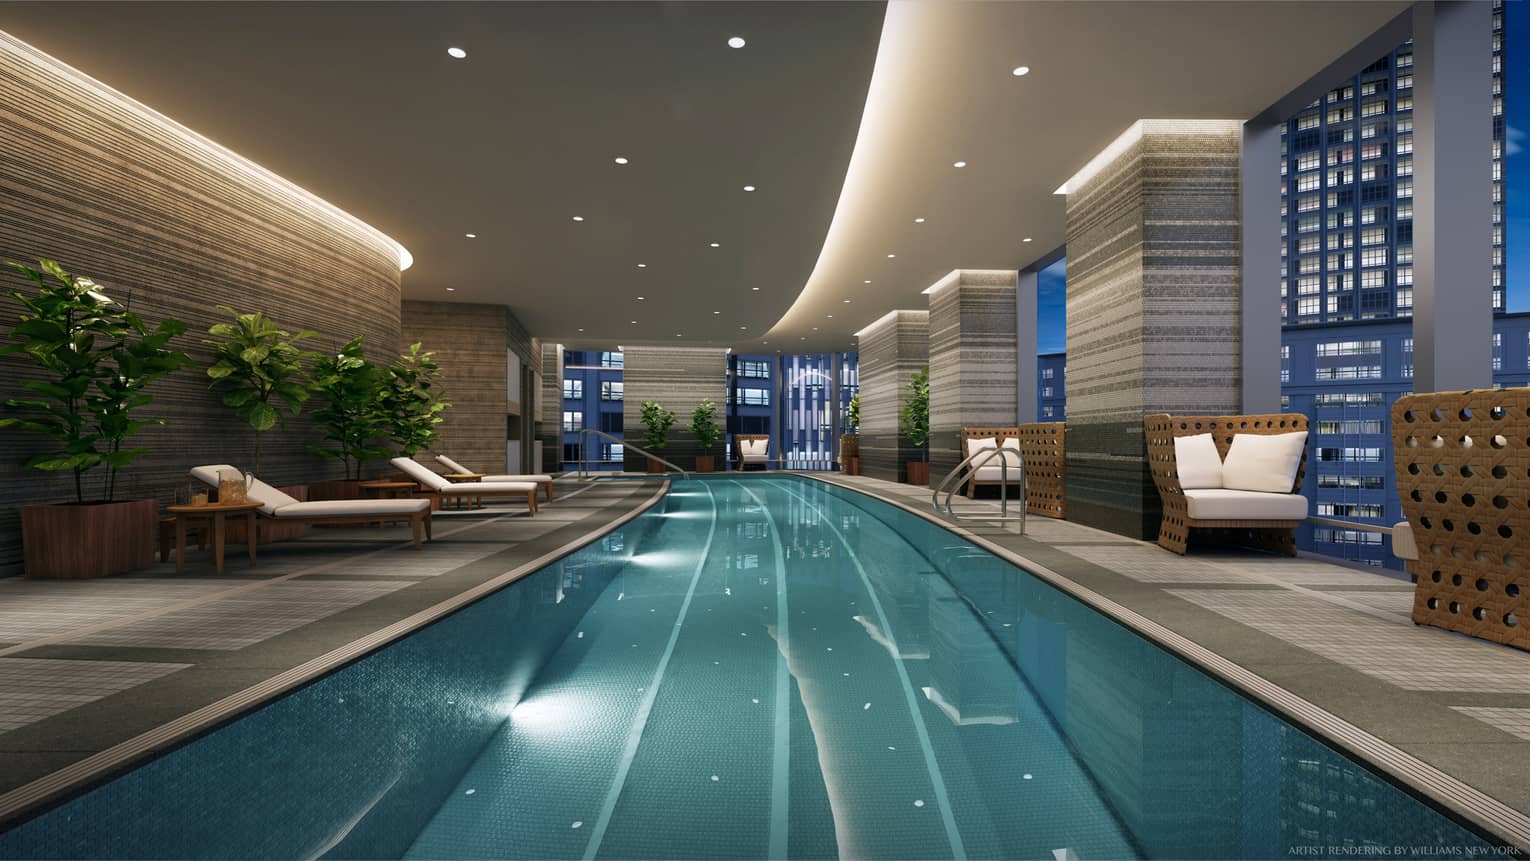 One Dalton Street, Boston long indoor swimming pool under accent, pot lights, chairs by window with city lights views